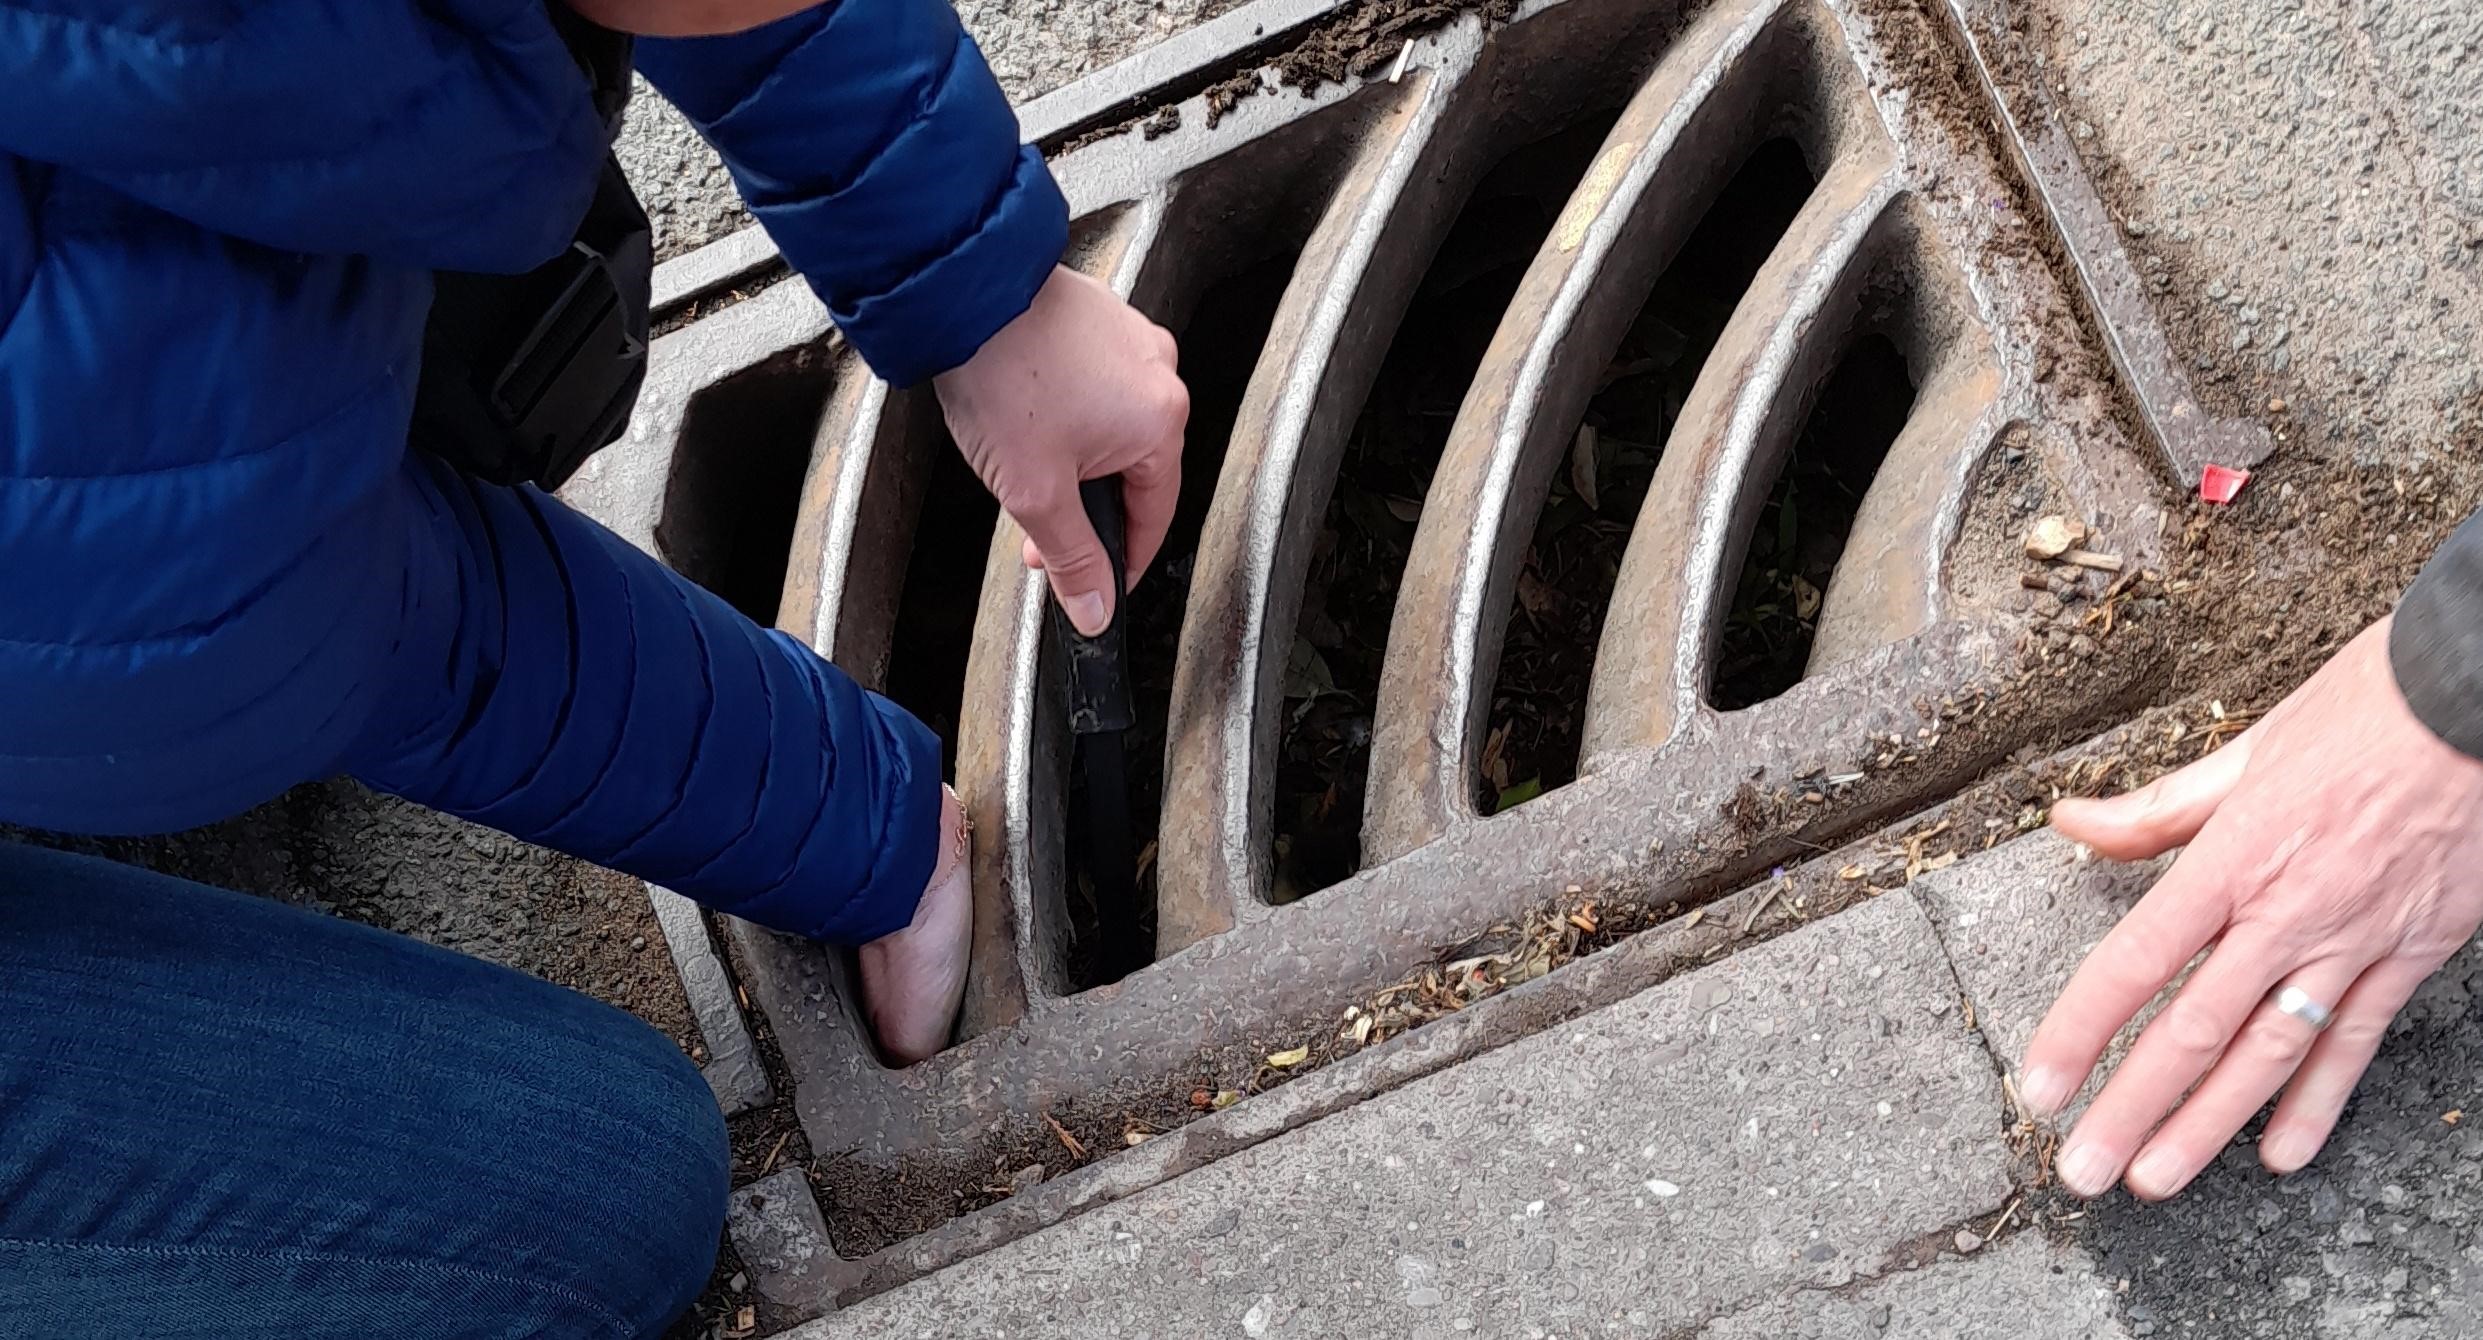 People attempt to retrieve ducklings from under a grate